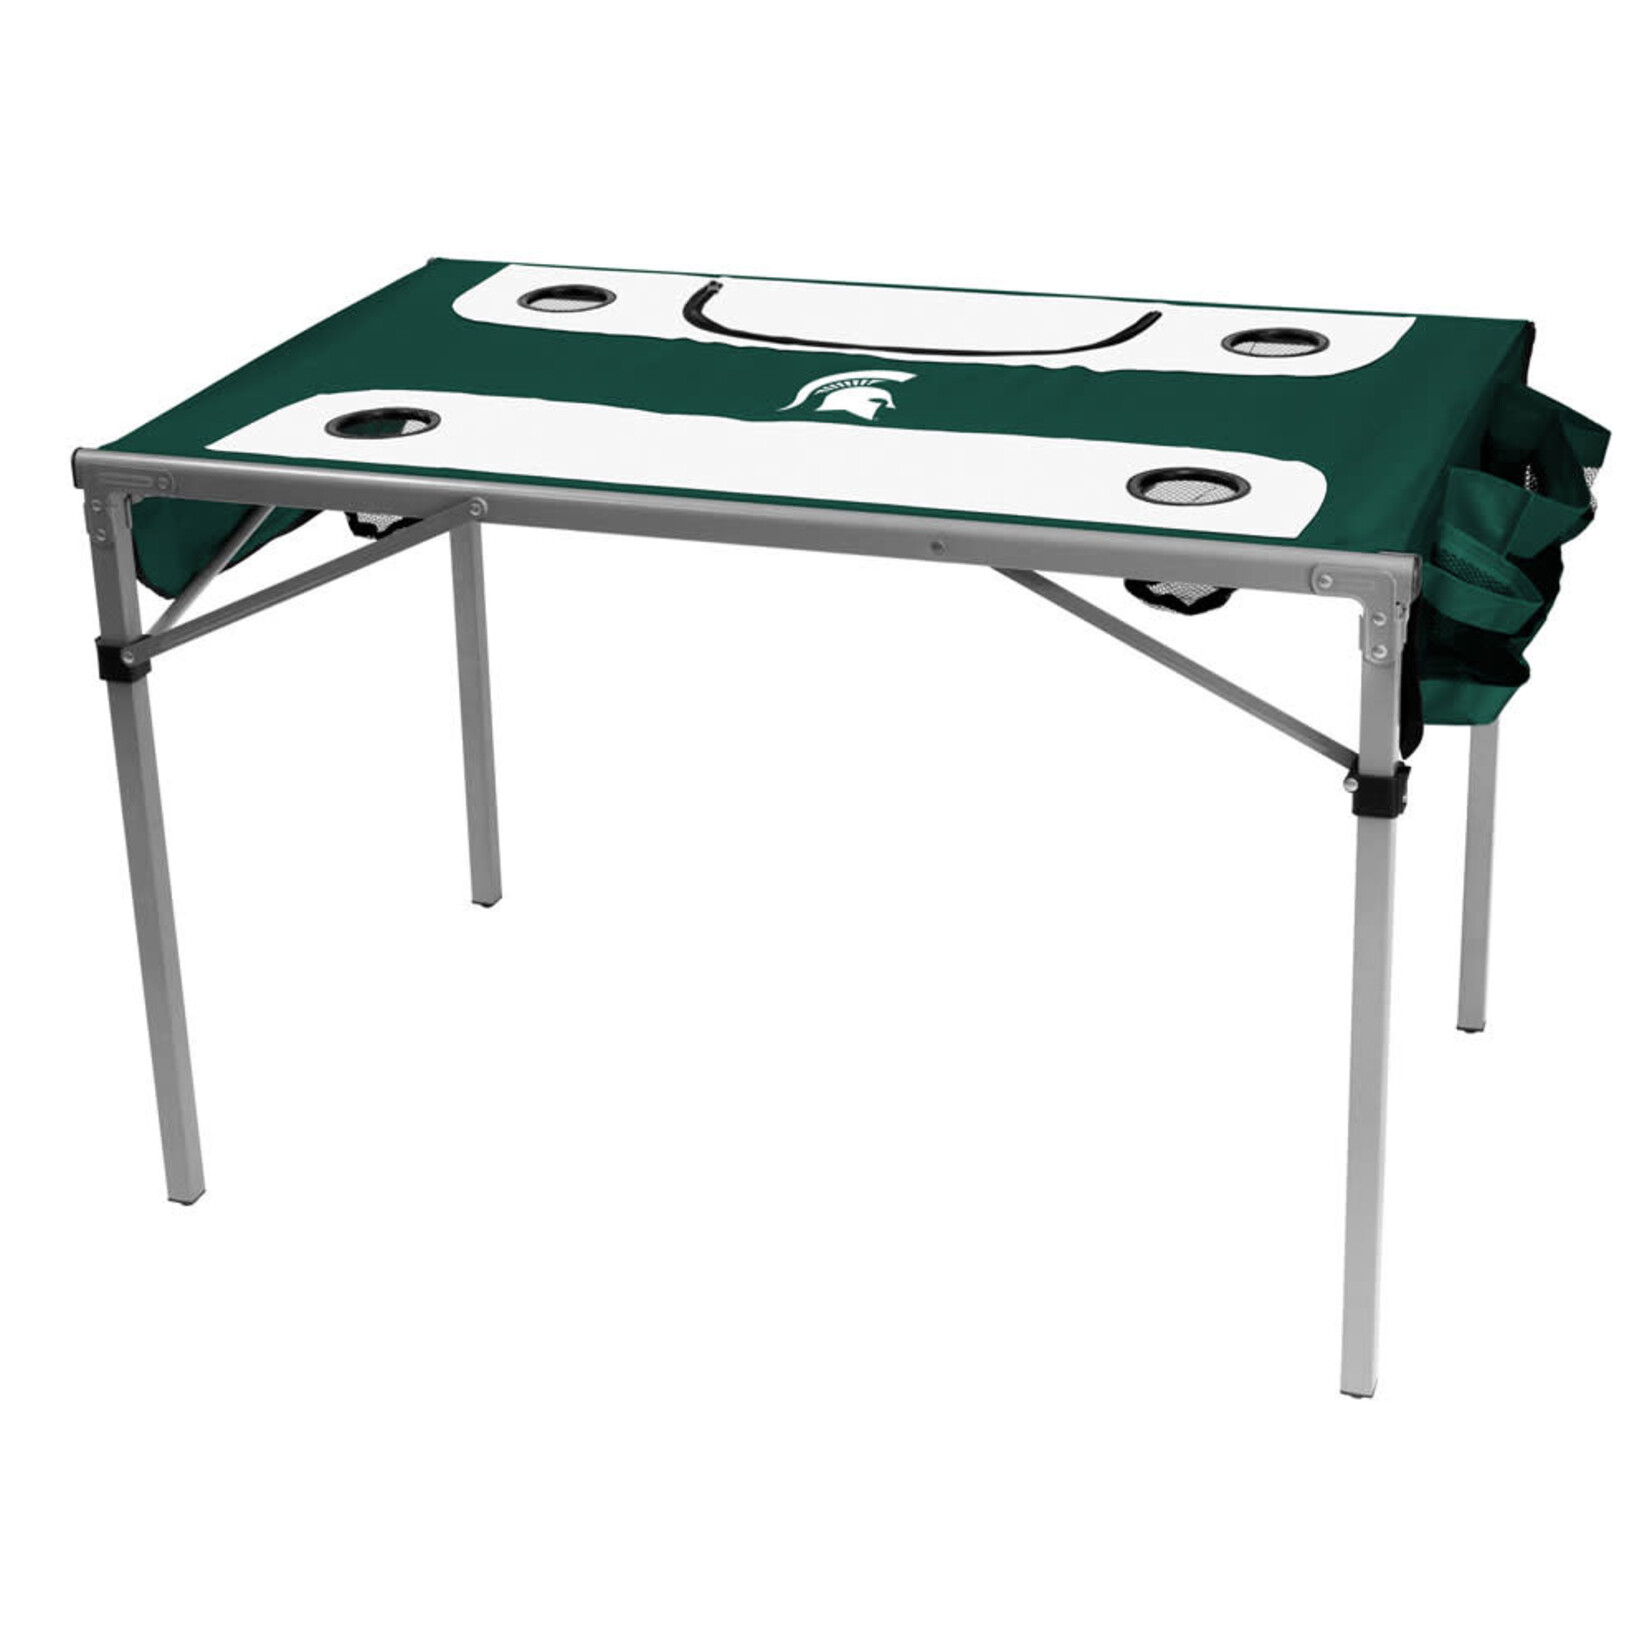 Logo Brands NCAA Michigan State University Table Total Tailgate